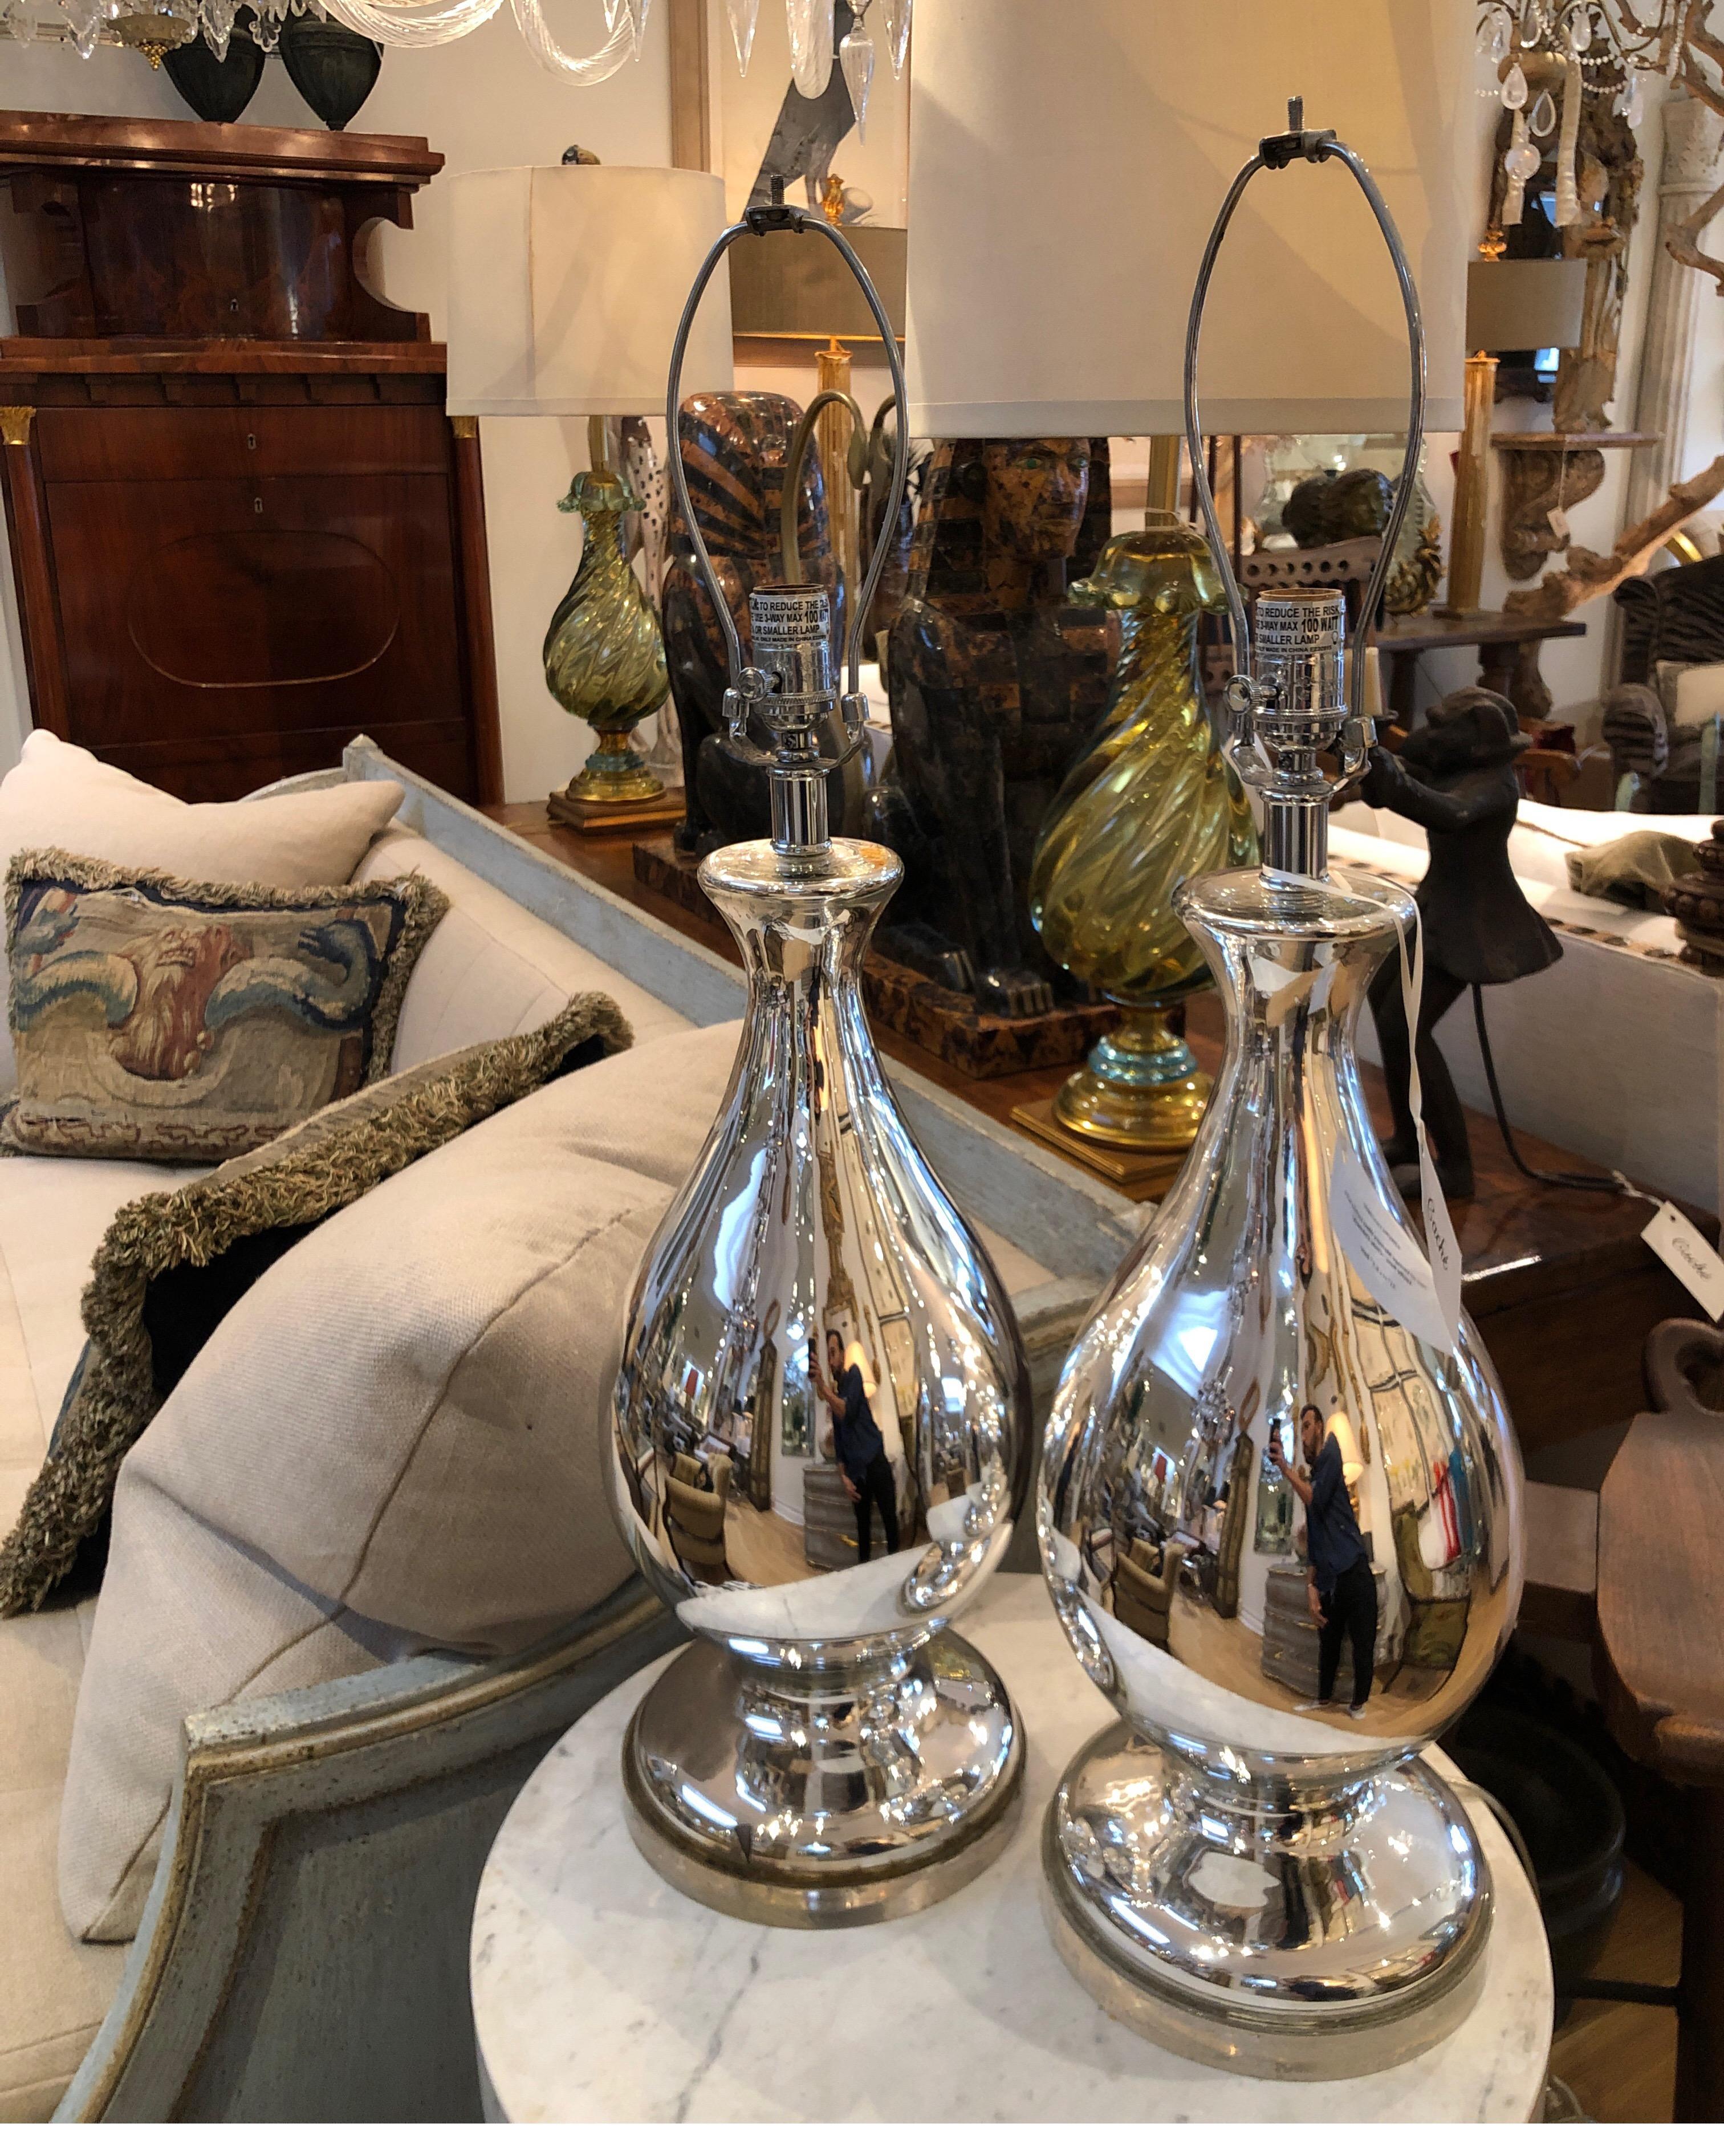 Pair of mercury glass lamps by Cindy Ciskowski. Each lamp sits on a Lucite base with nicks/chrome hardware.
Measures: 31